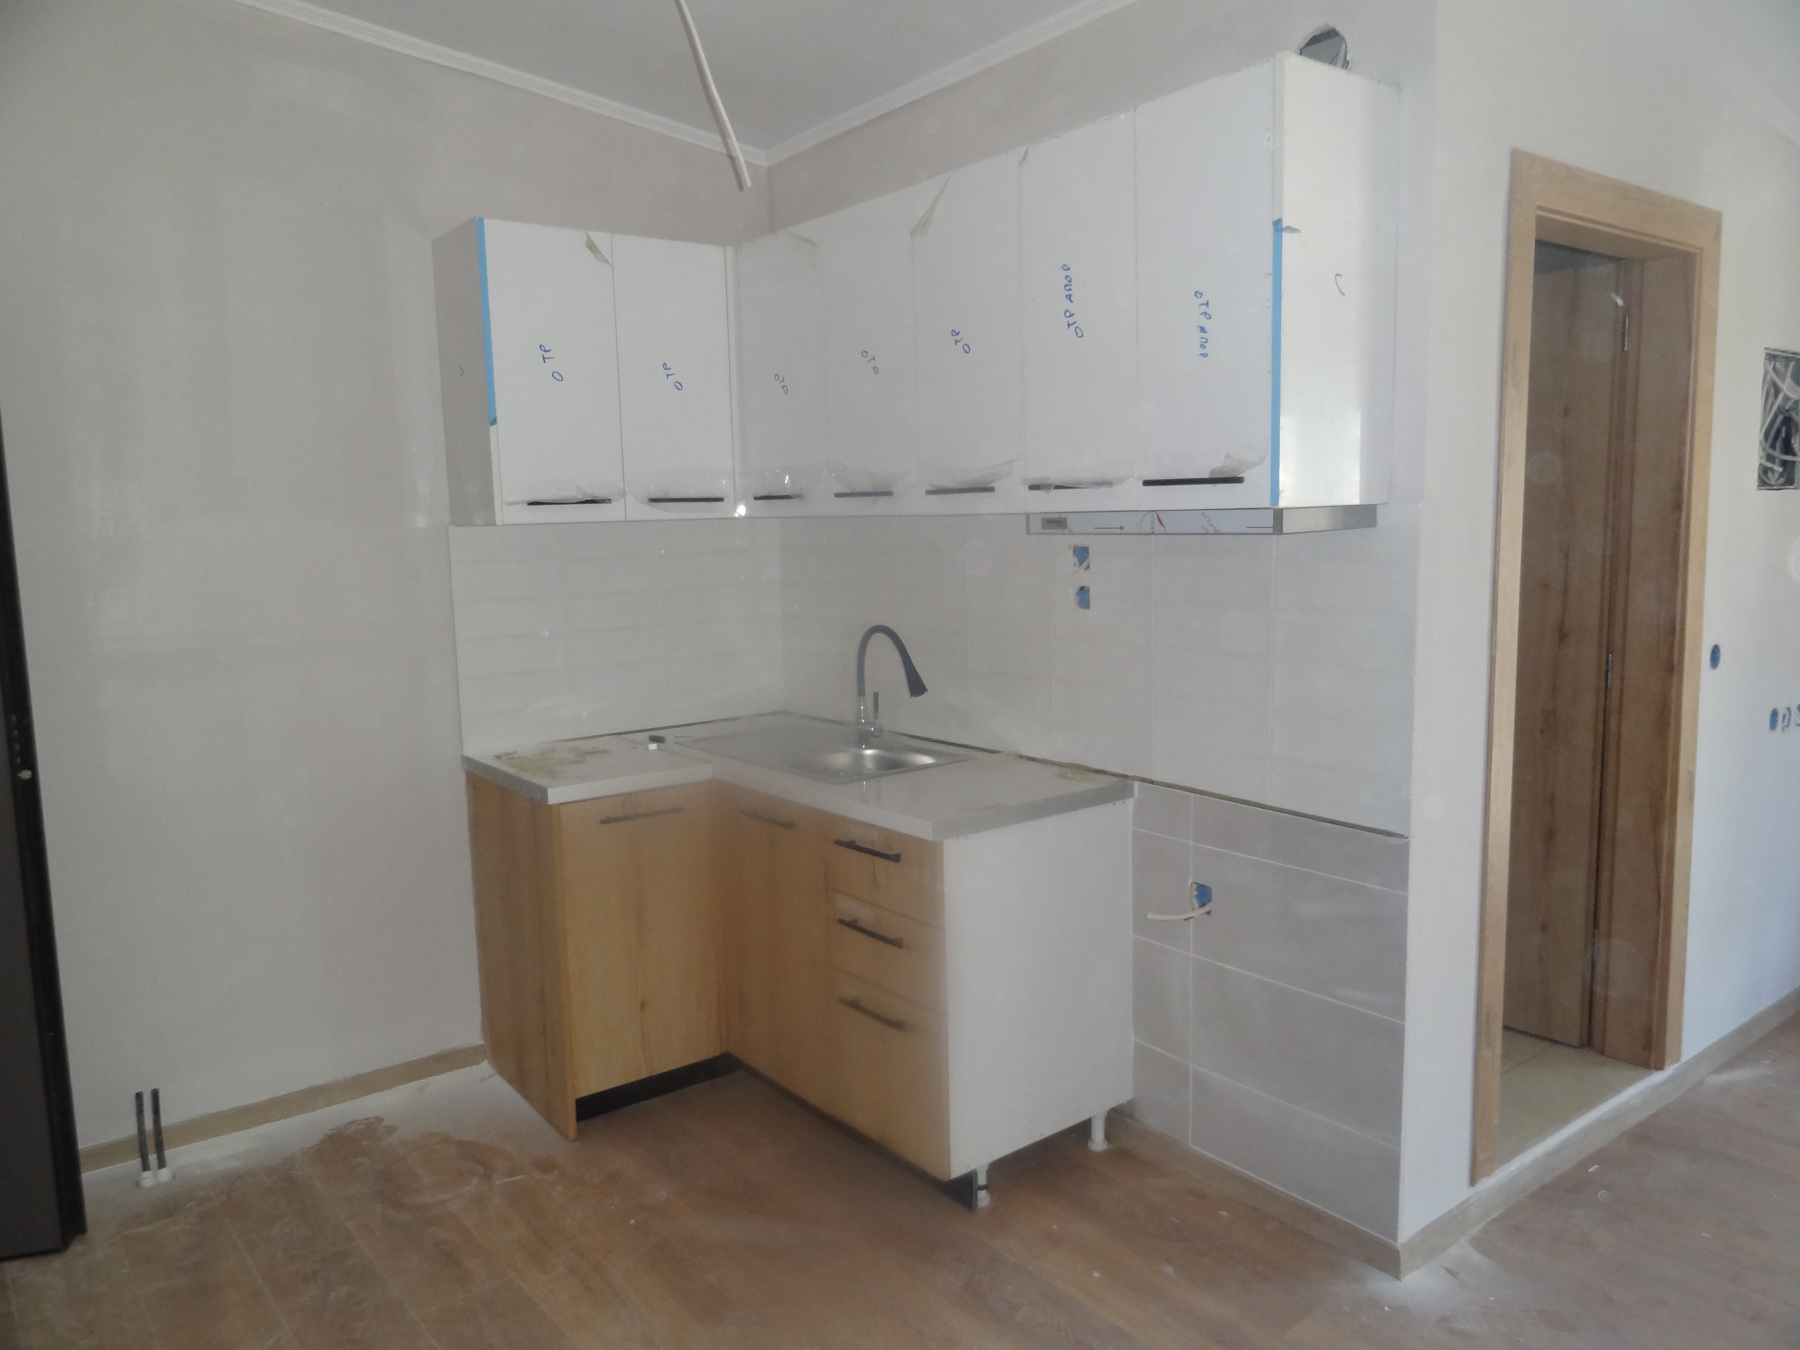 Newly built 1 bedroom apartment for rent, 52 sq.m. 2nd floor in a central part of Anatoli Ioannina